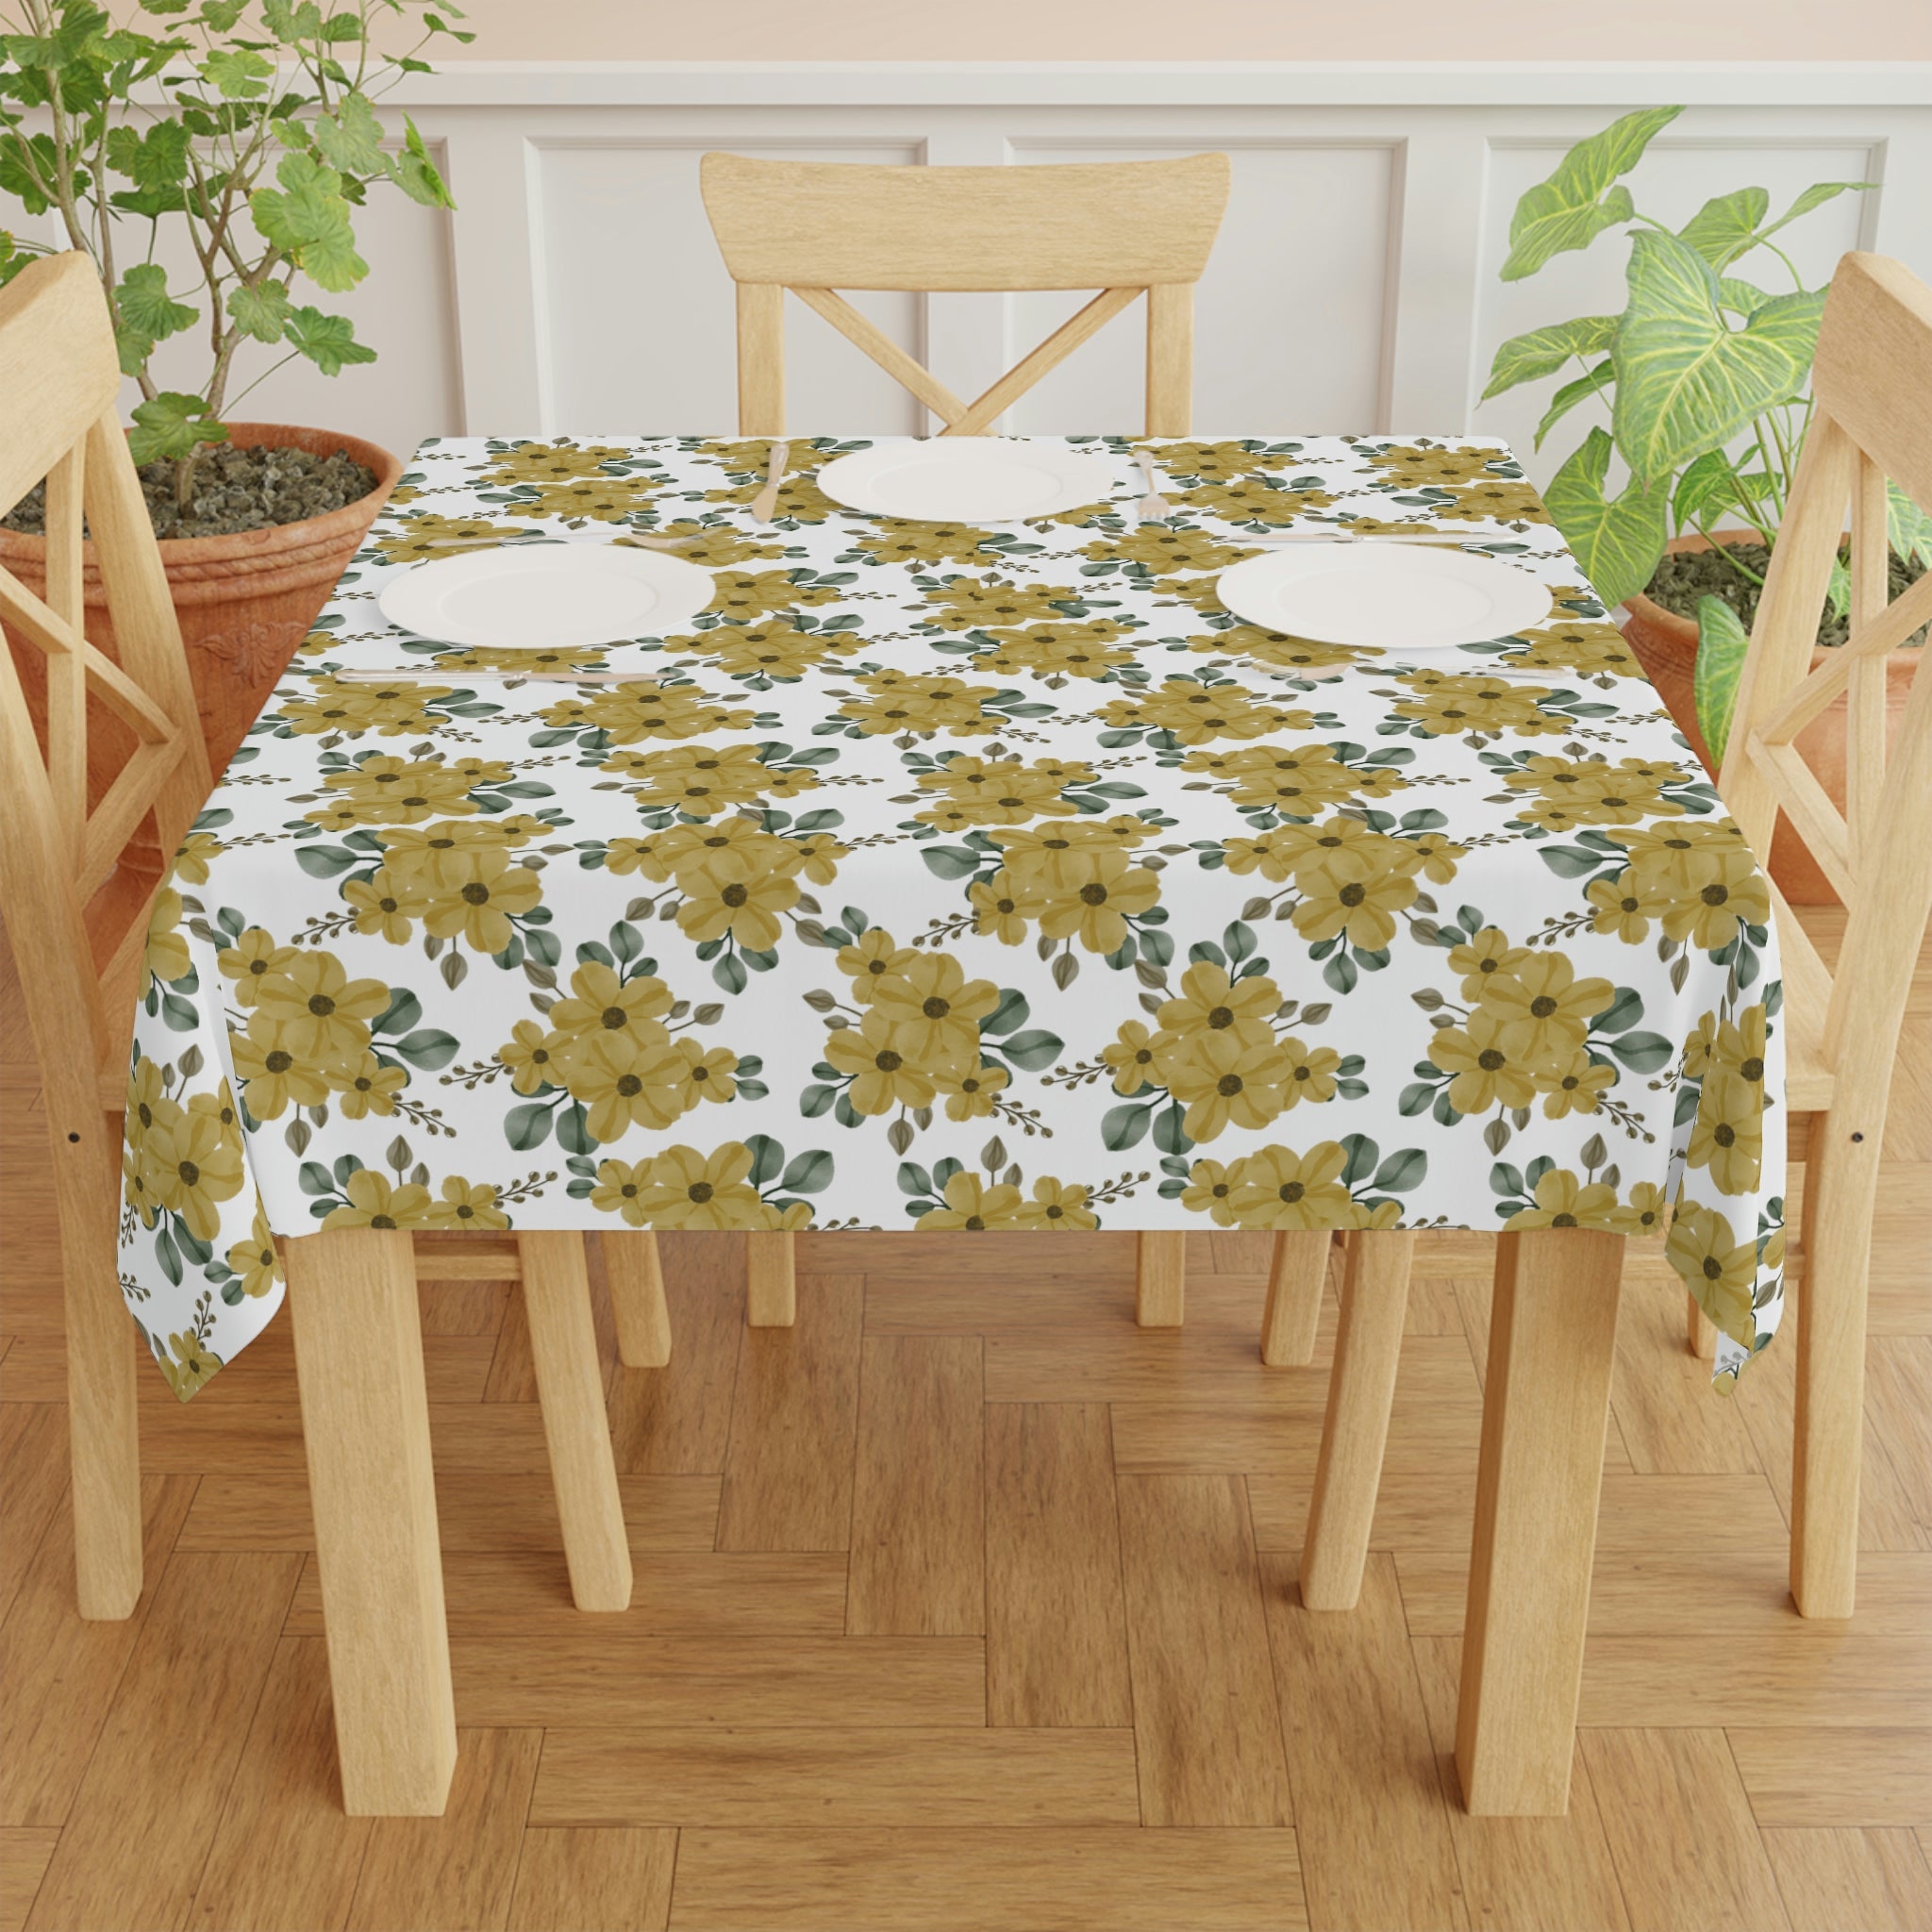 Yellow flowers - White tablecloth